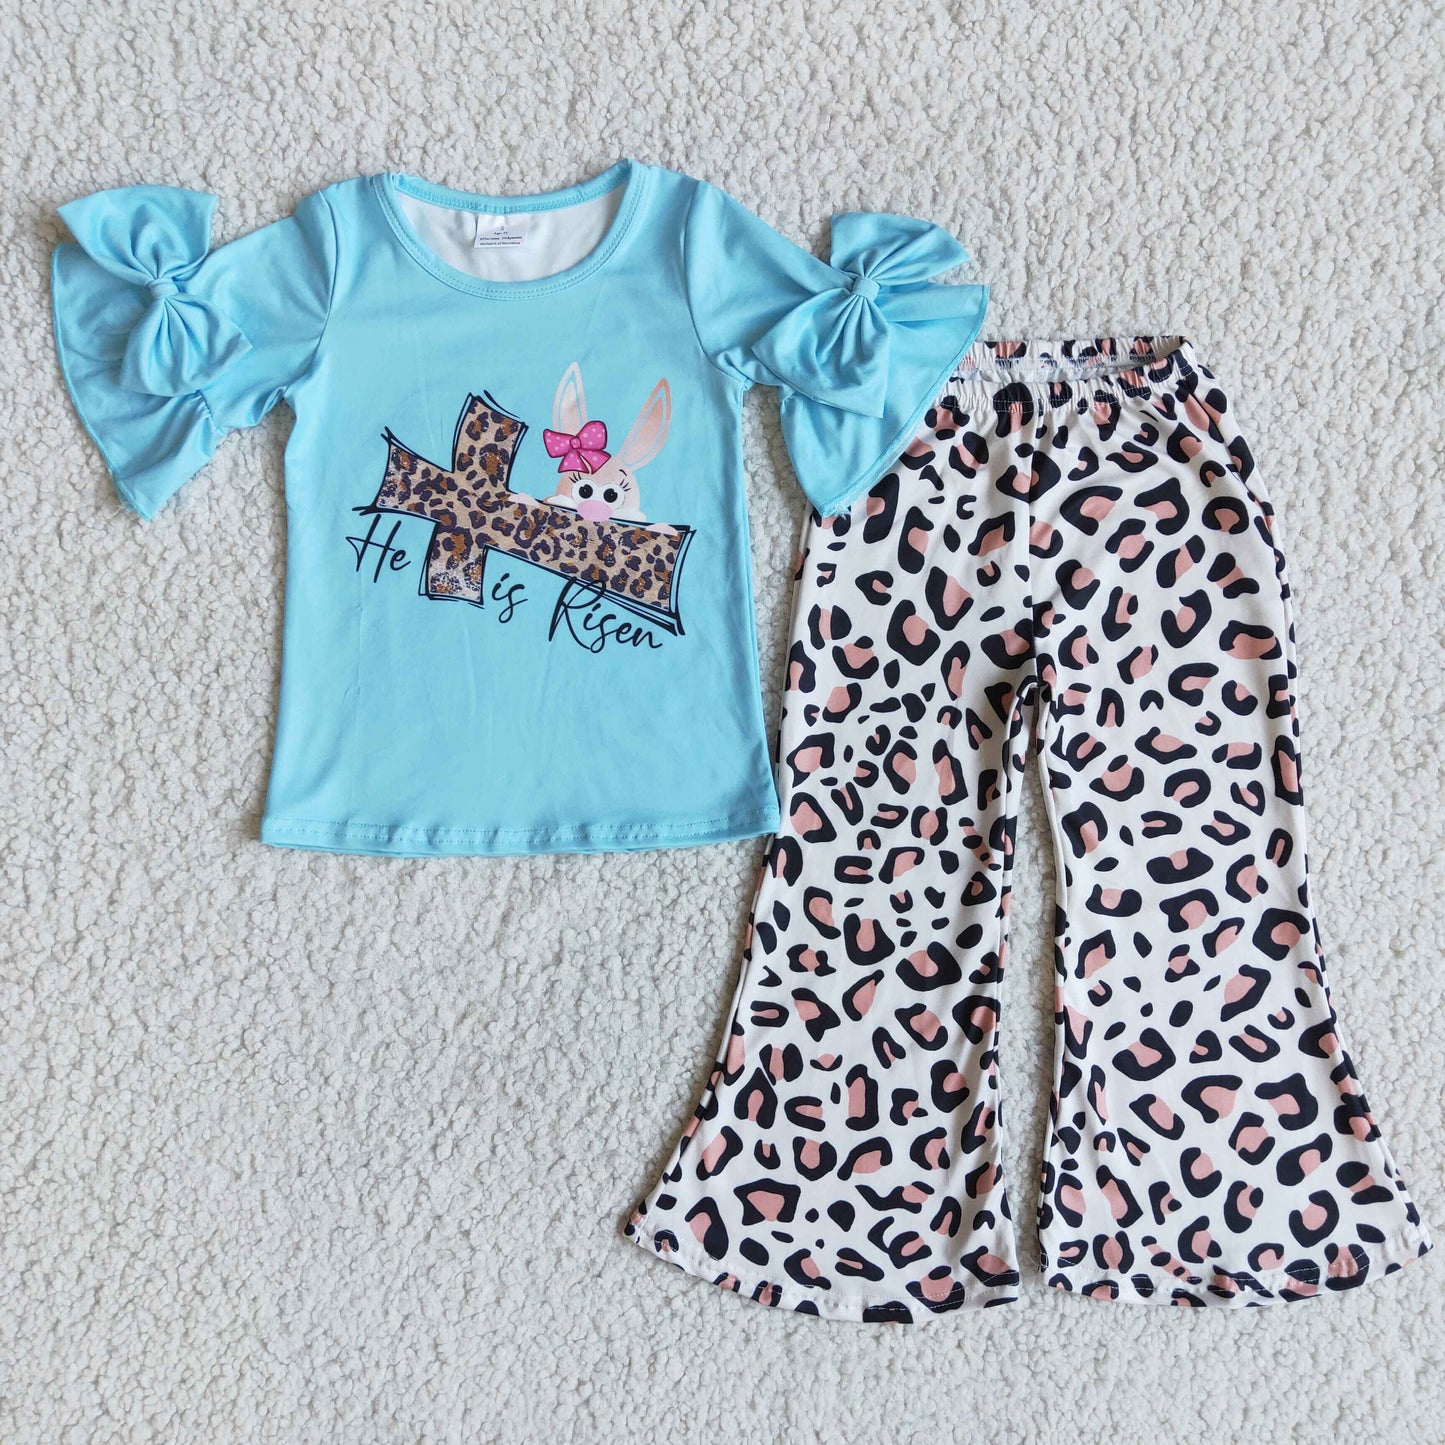 girl sweet bows design blue top match leopard pants kids bunny print outfit